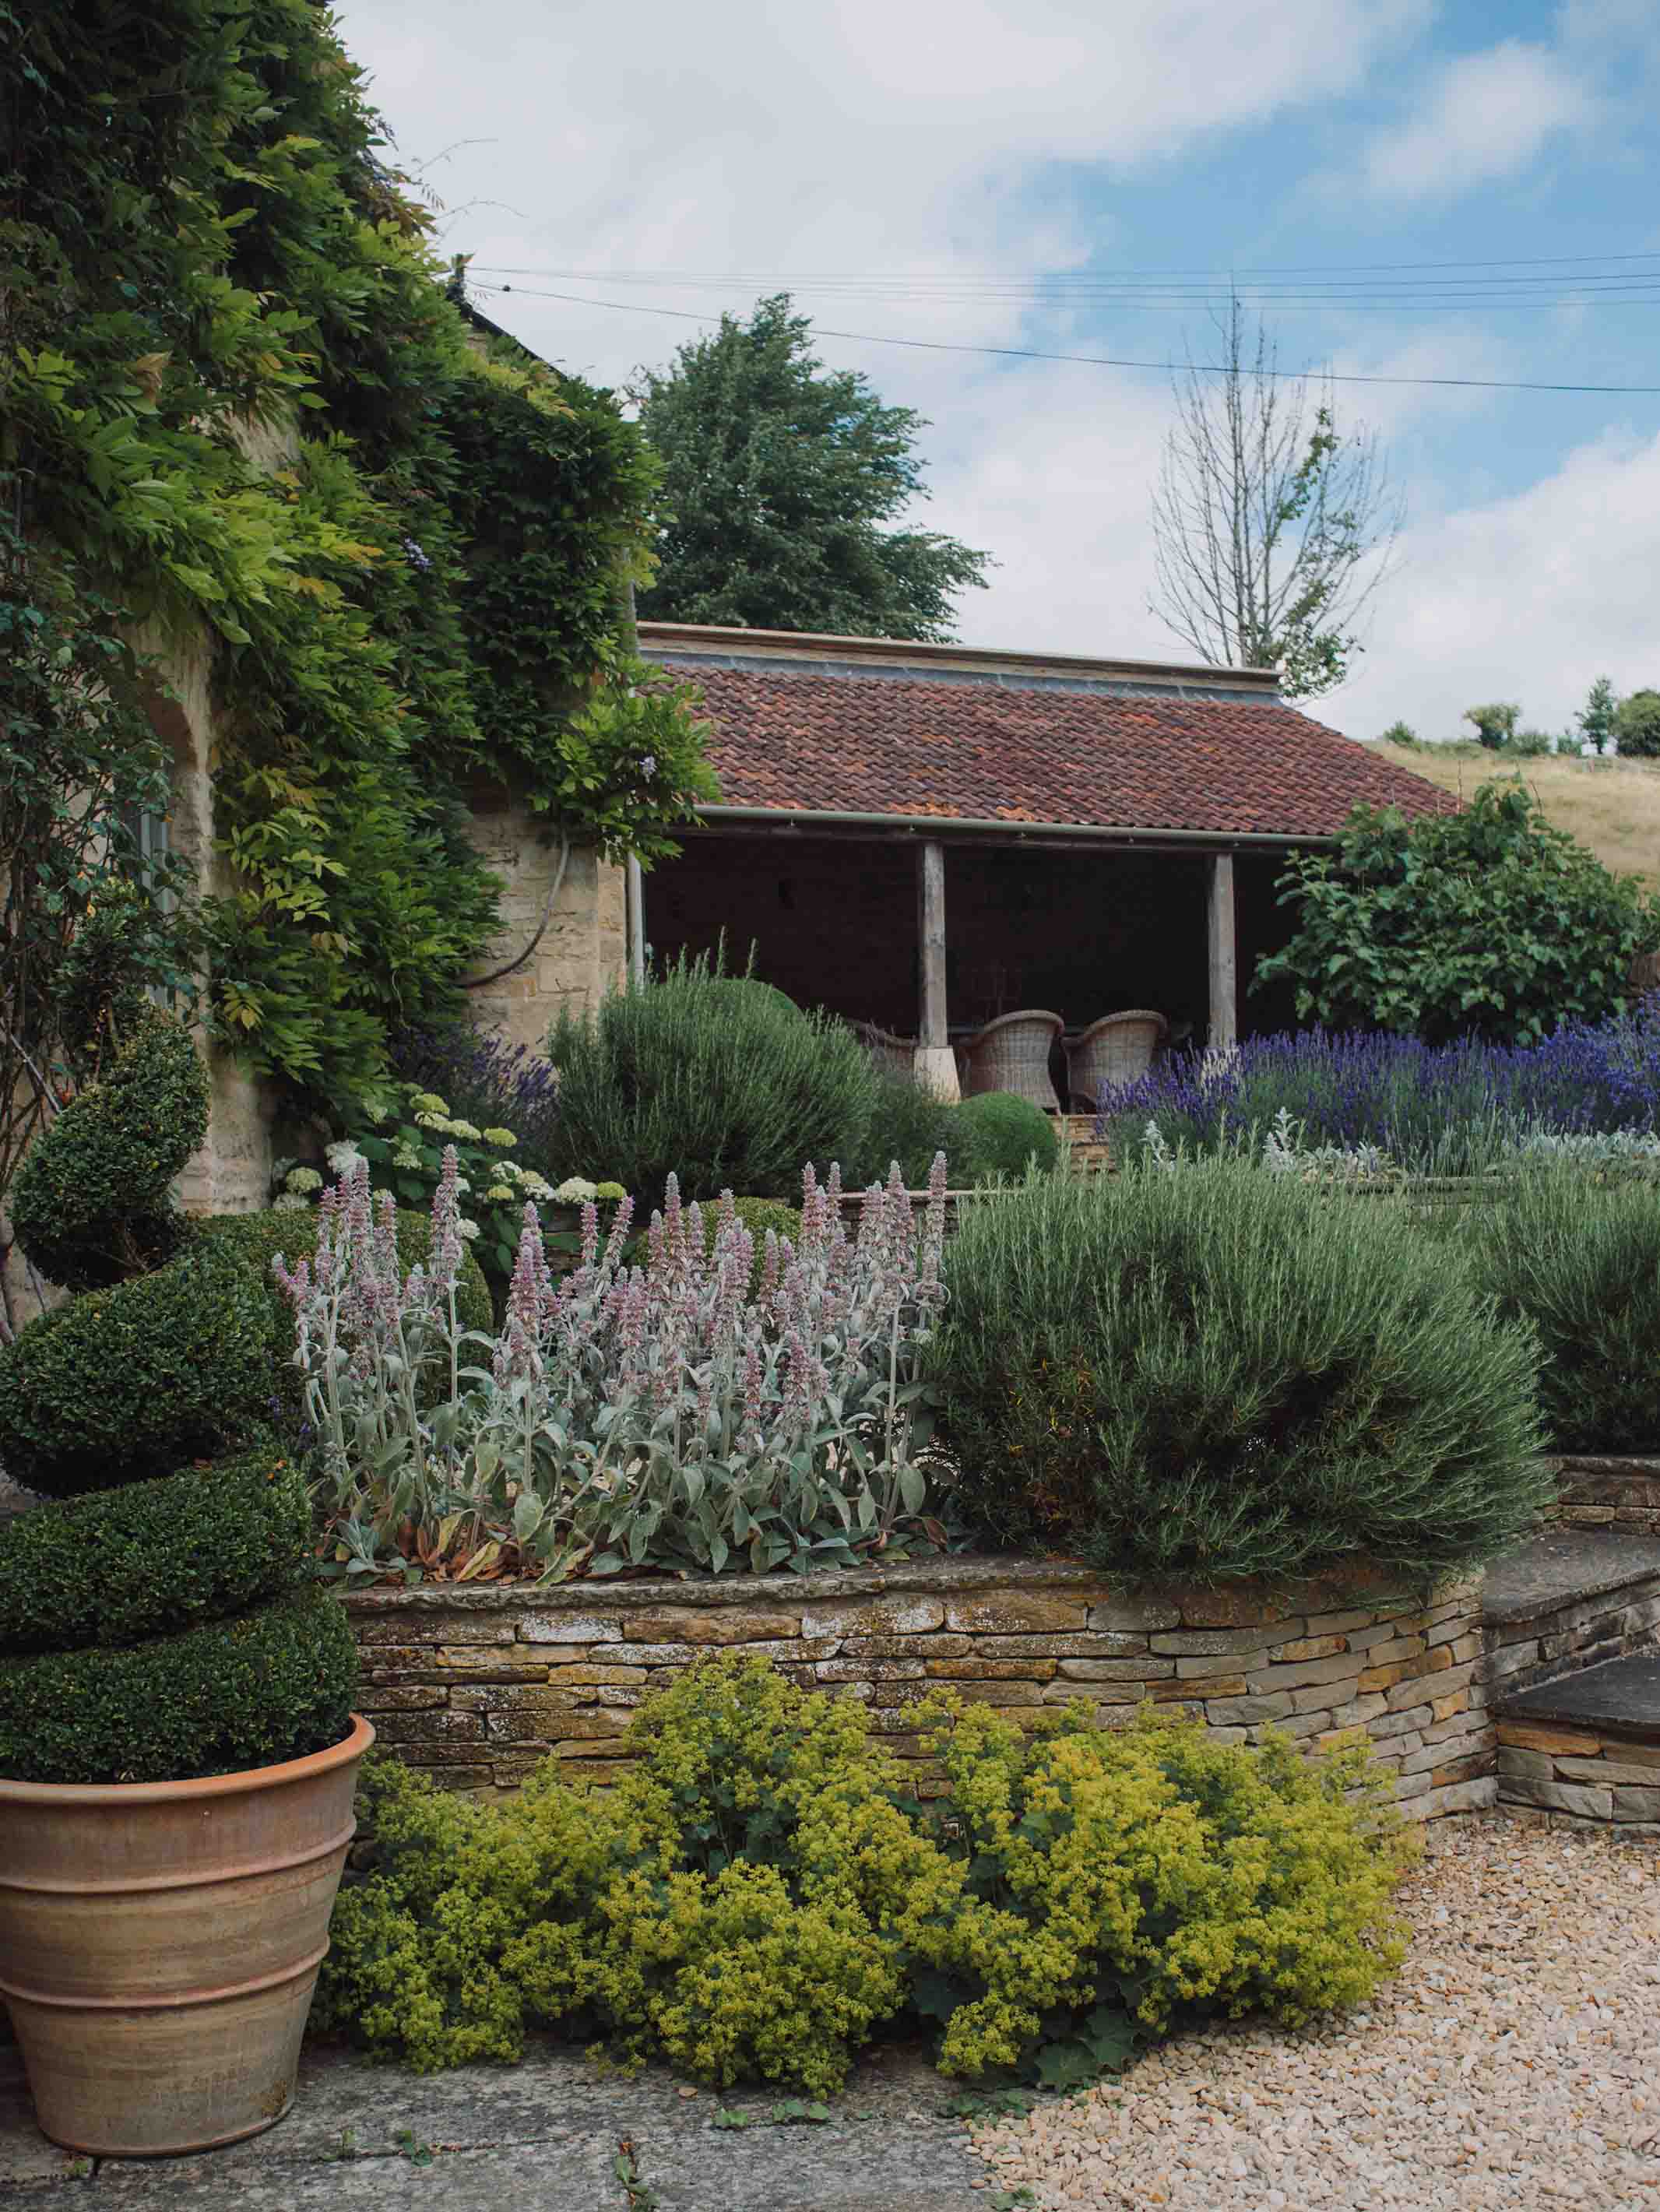 The picturesque gardens of Lavendar planted with wild flowers, herbs and lavender shrubs